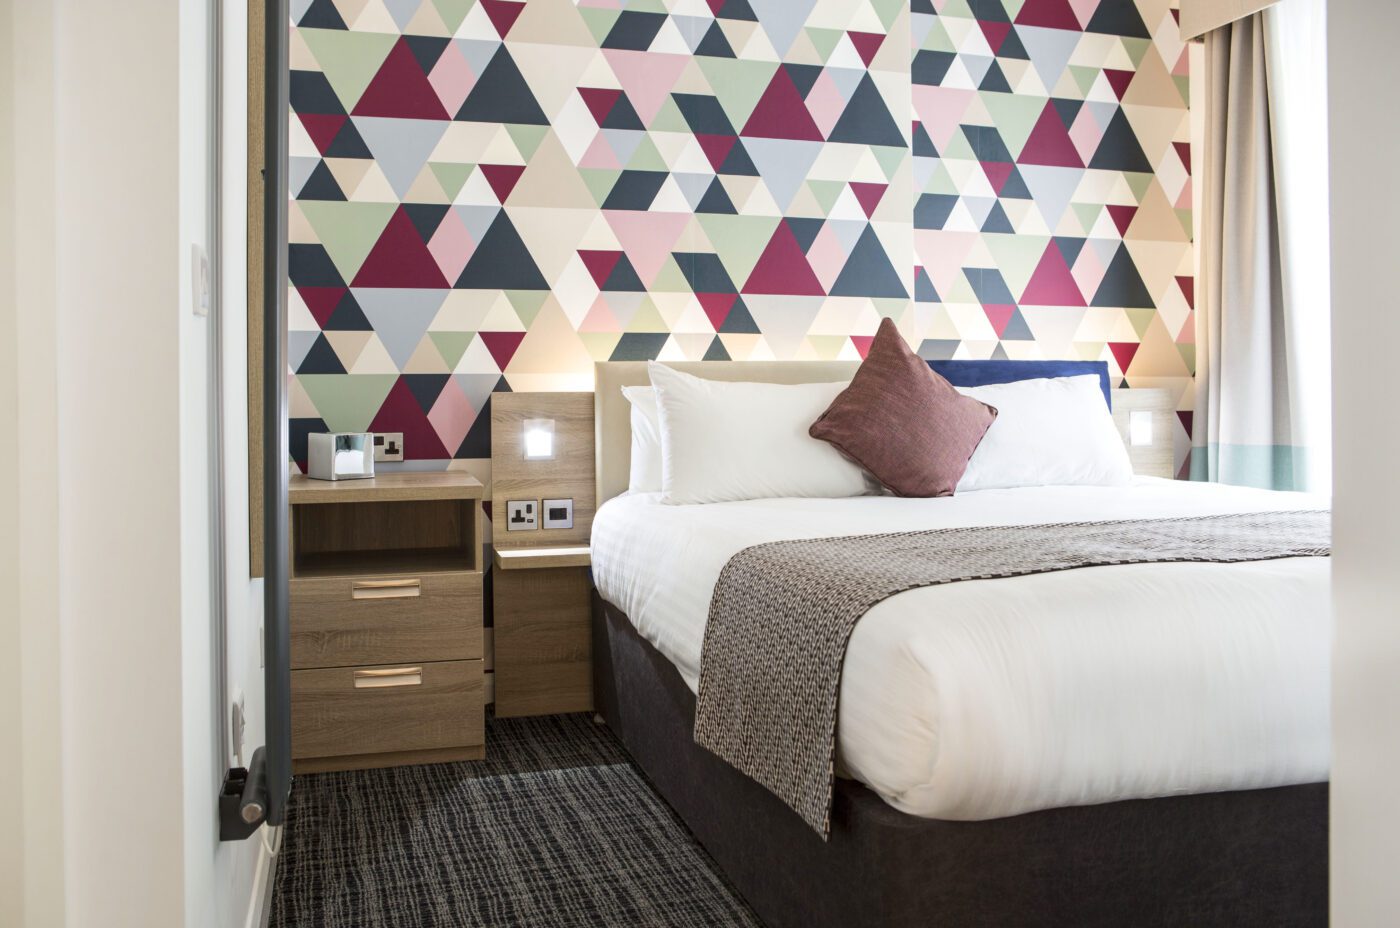 Cityroomz bedroom with a double bed, theme wall and bedside tables.